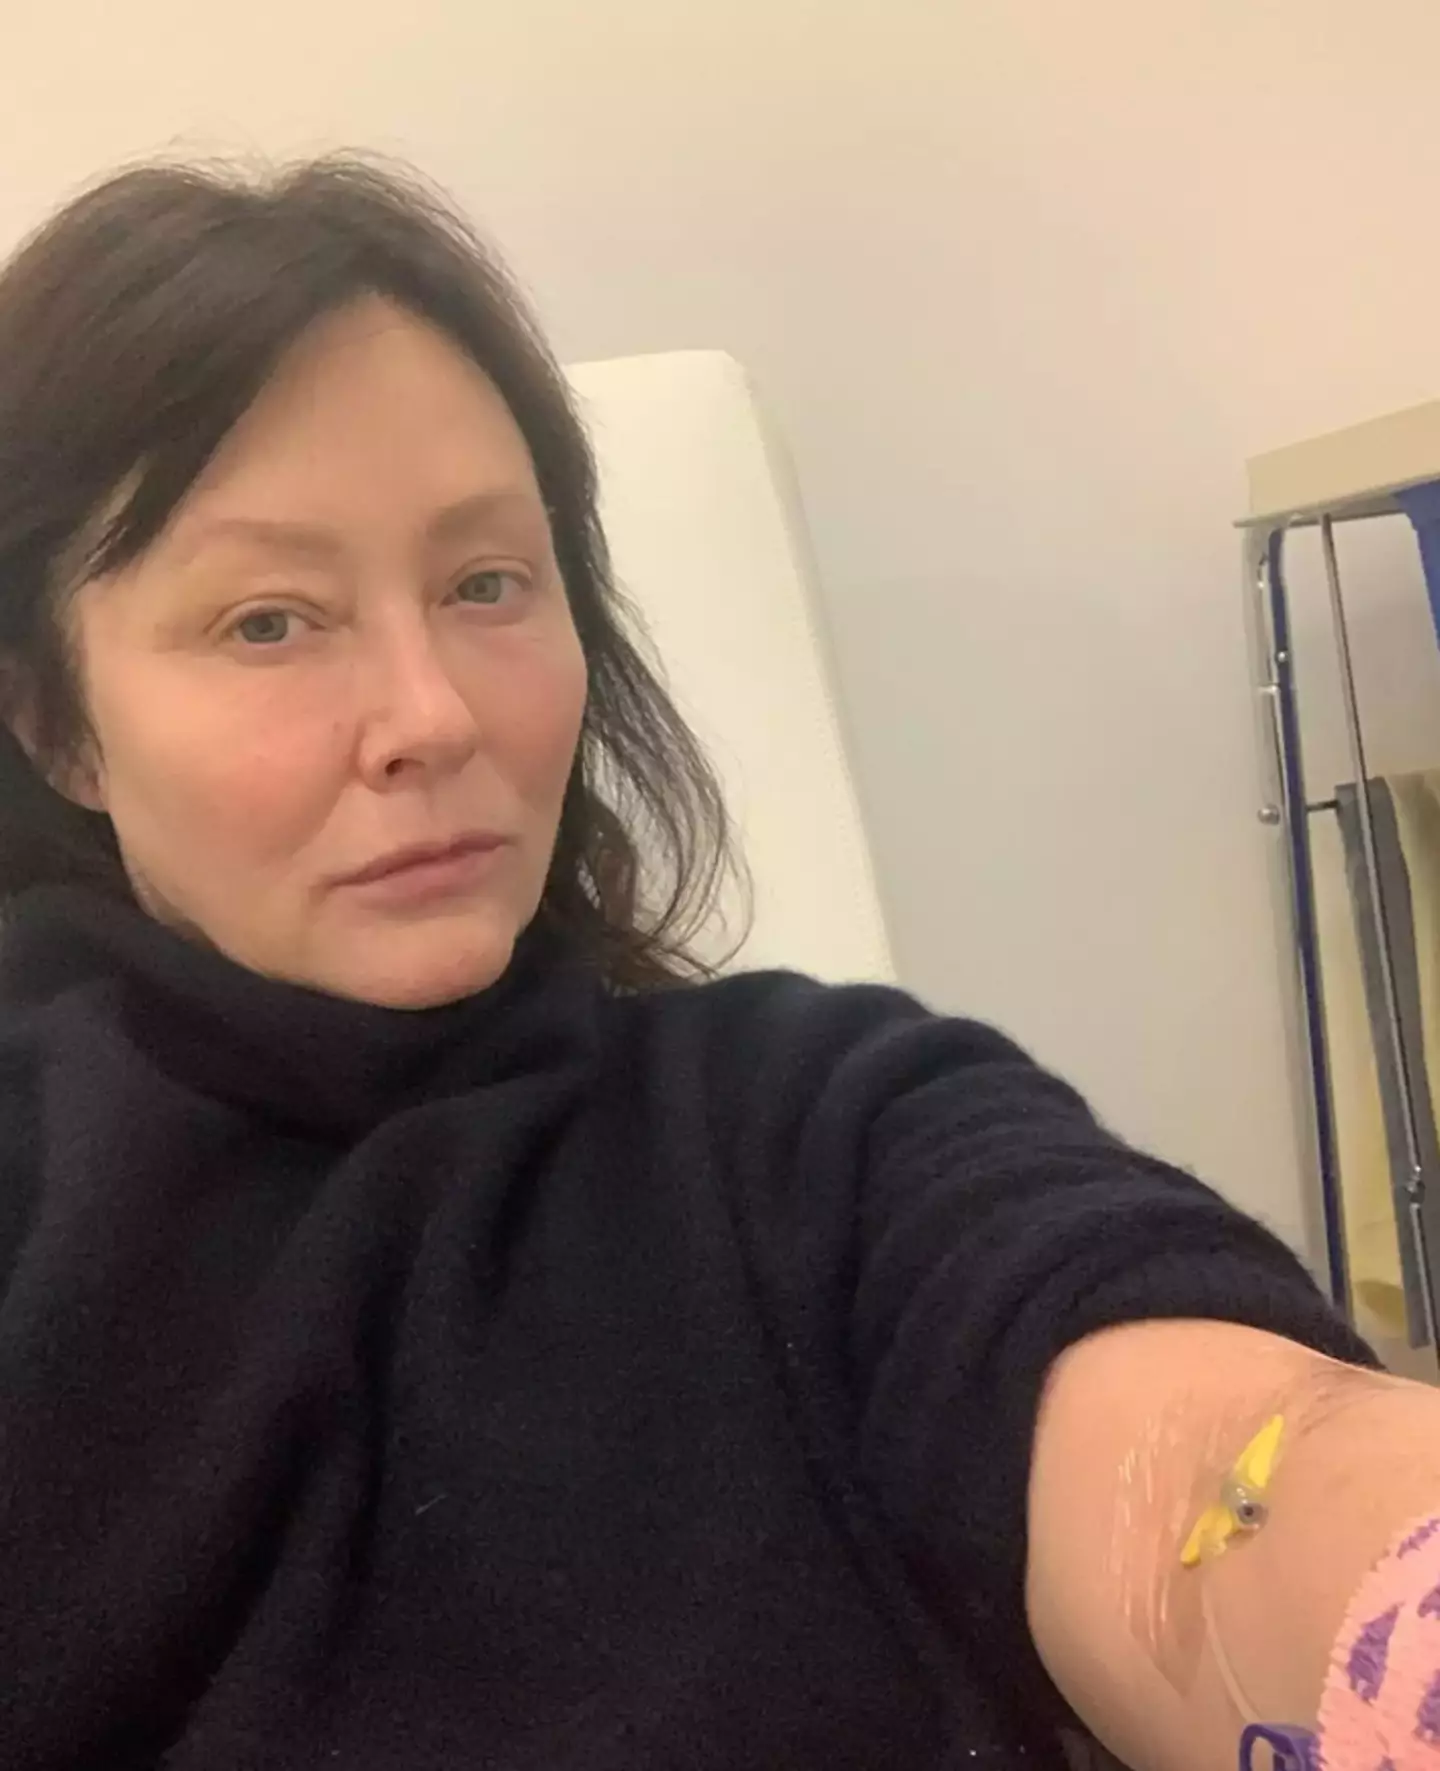 Shannen Doherty is preparing for death.